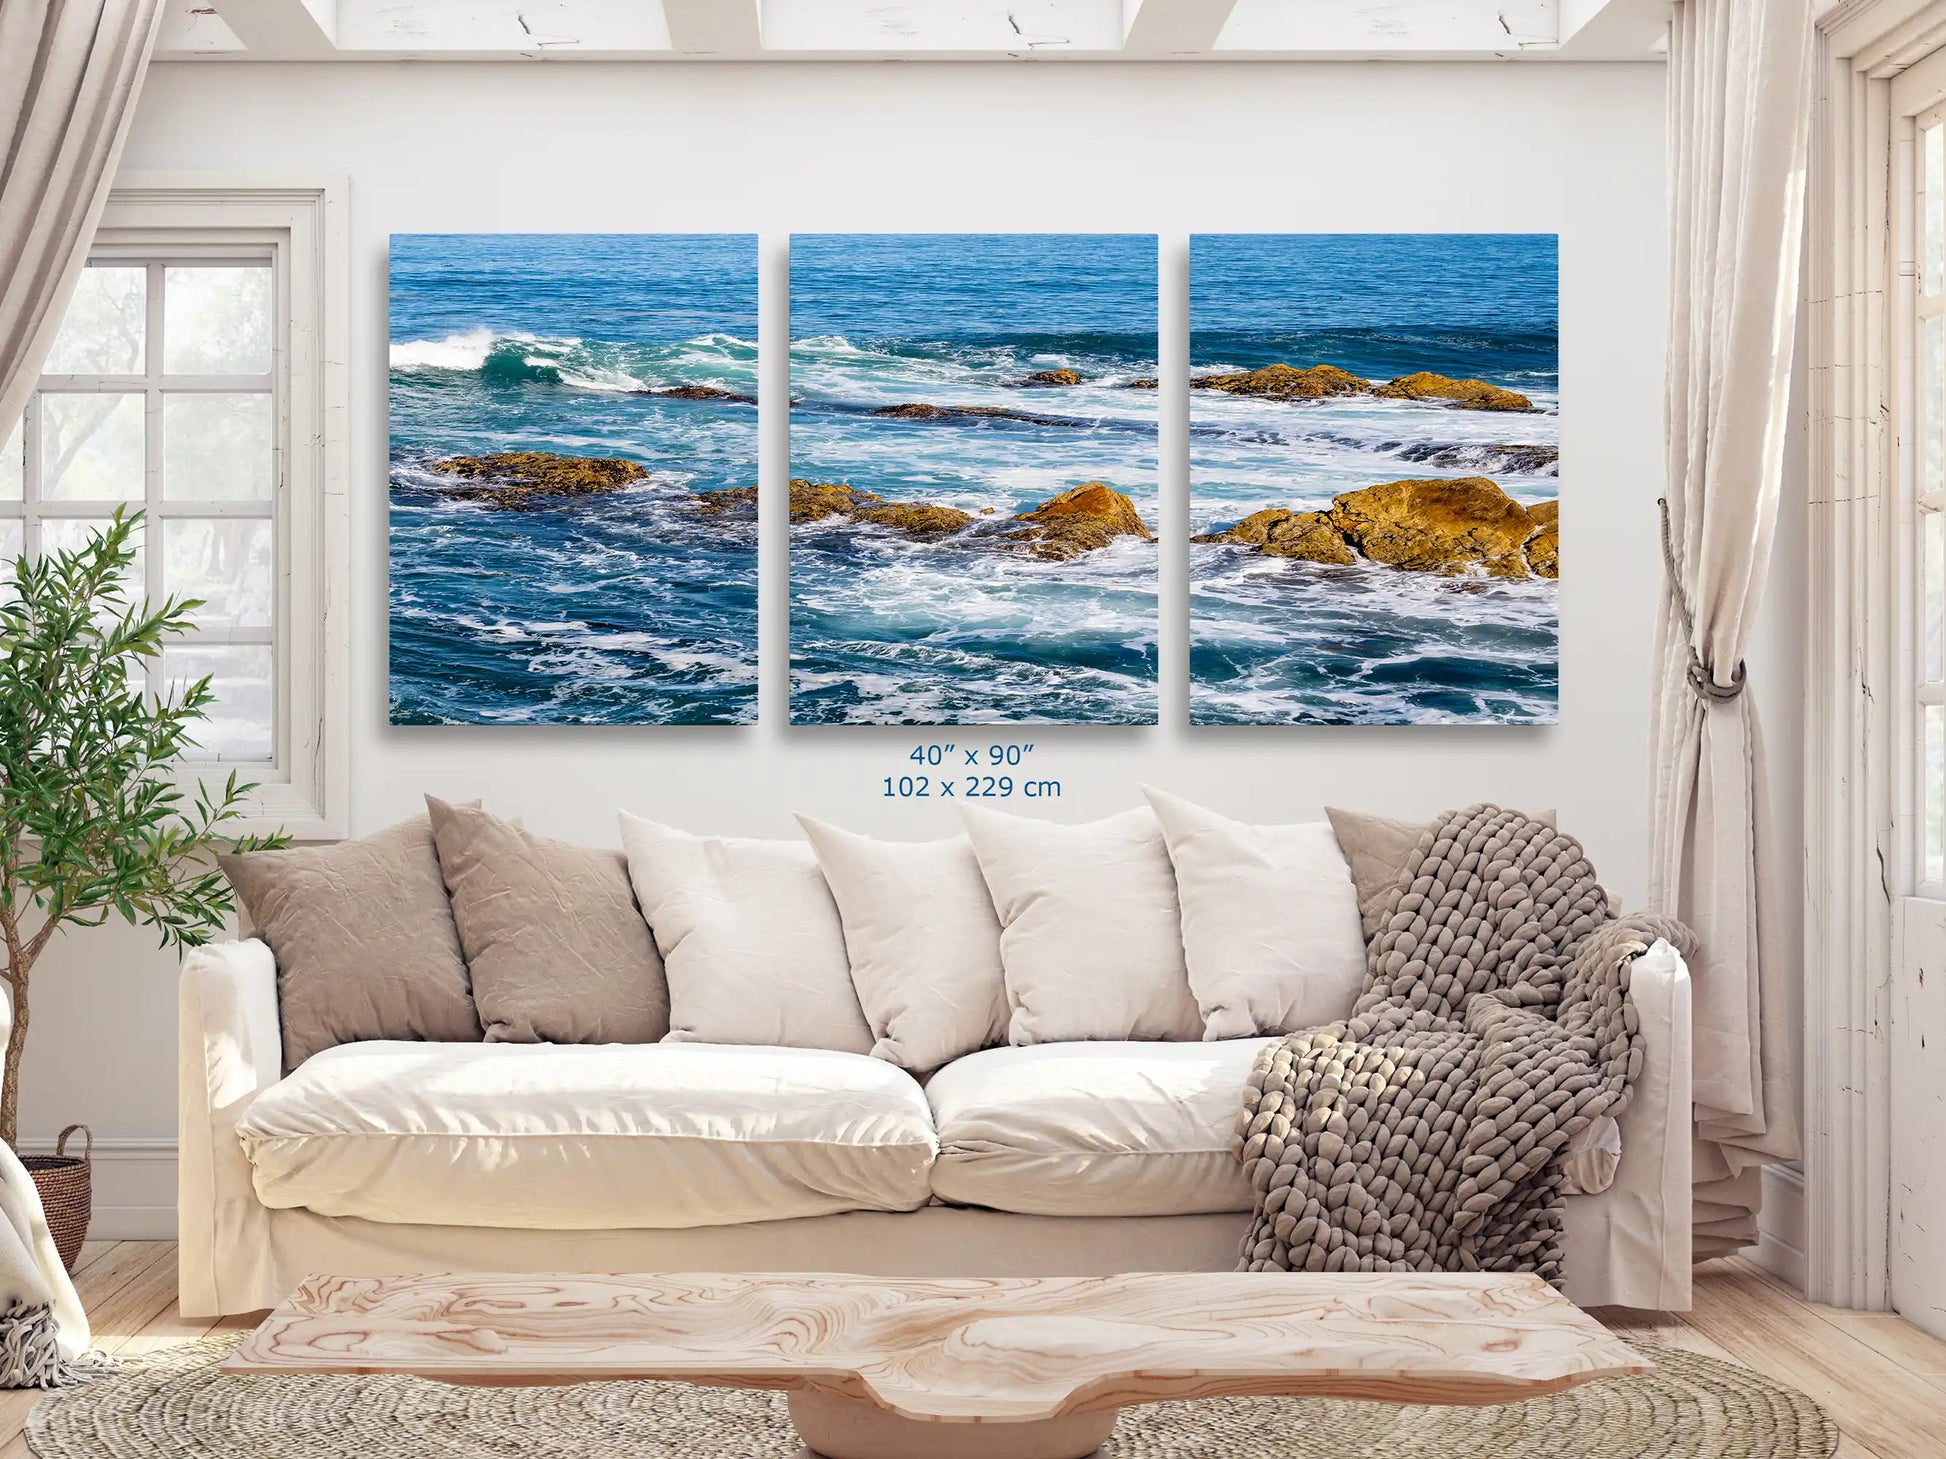 An expansive 40"x90" canvas art set of the ocean scene, divided into three panels, displayed over a large couch in a bright living room.